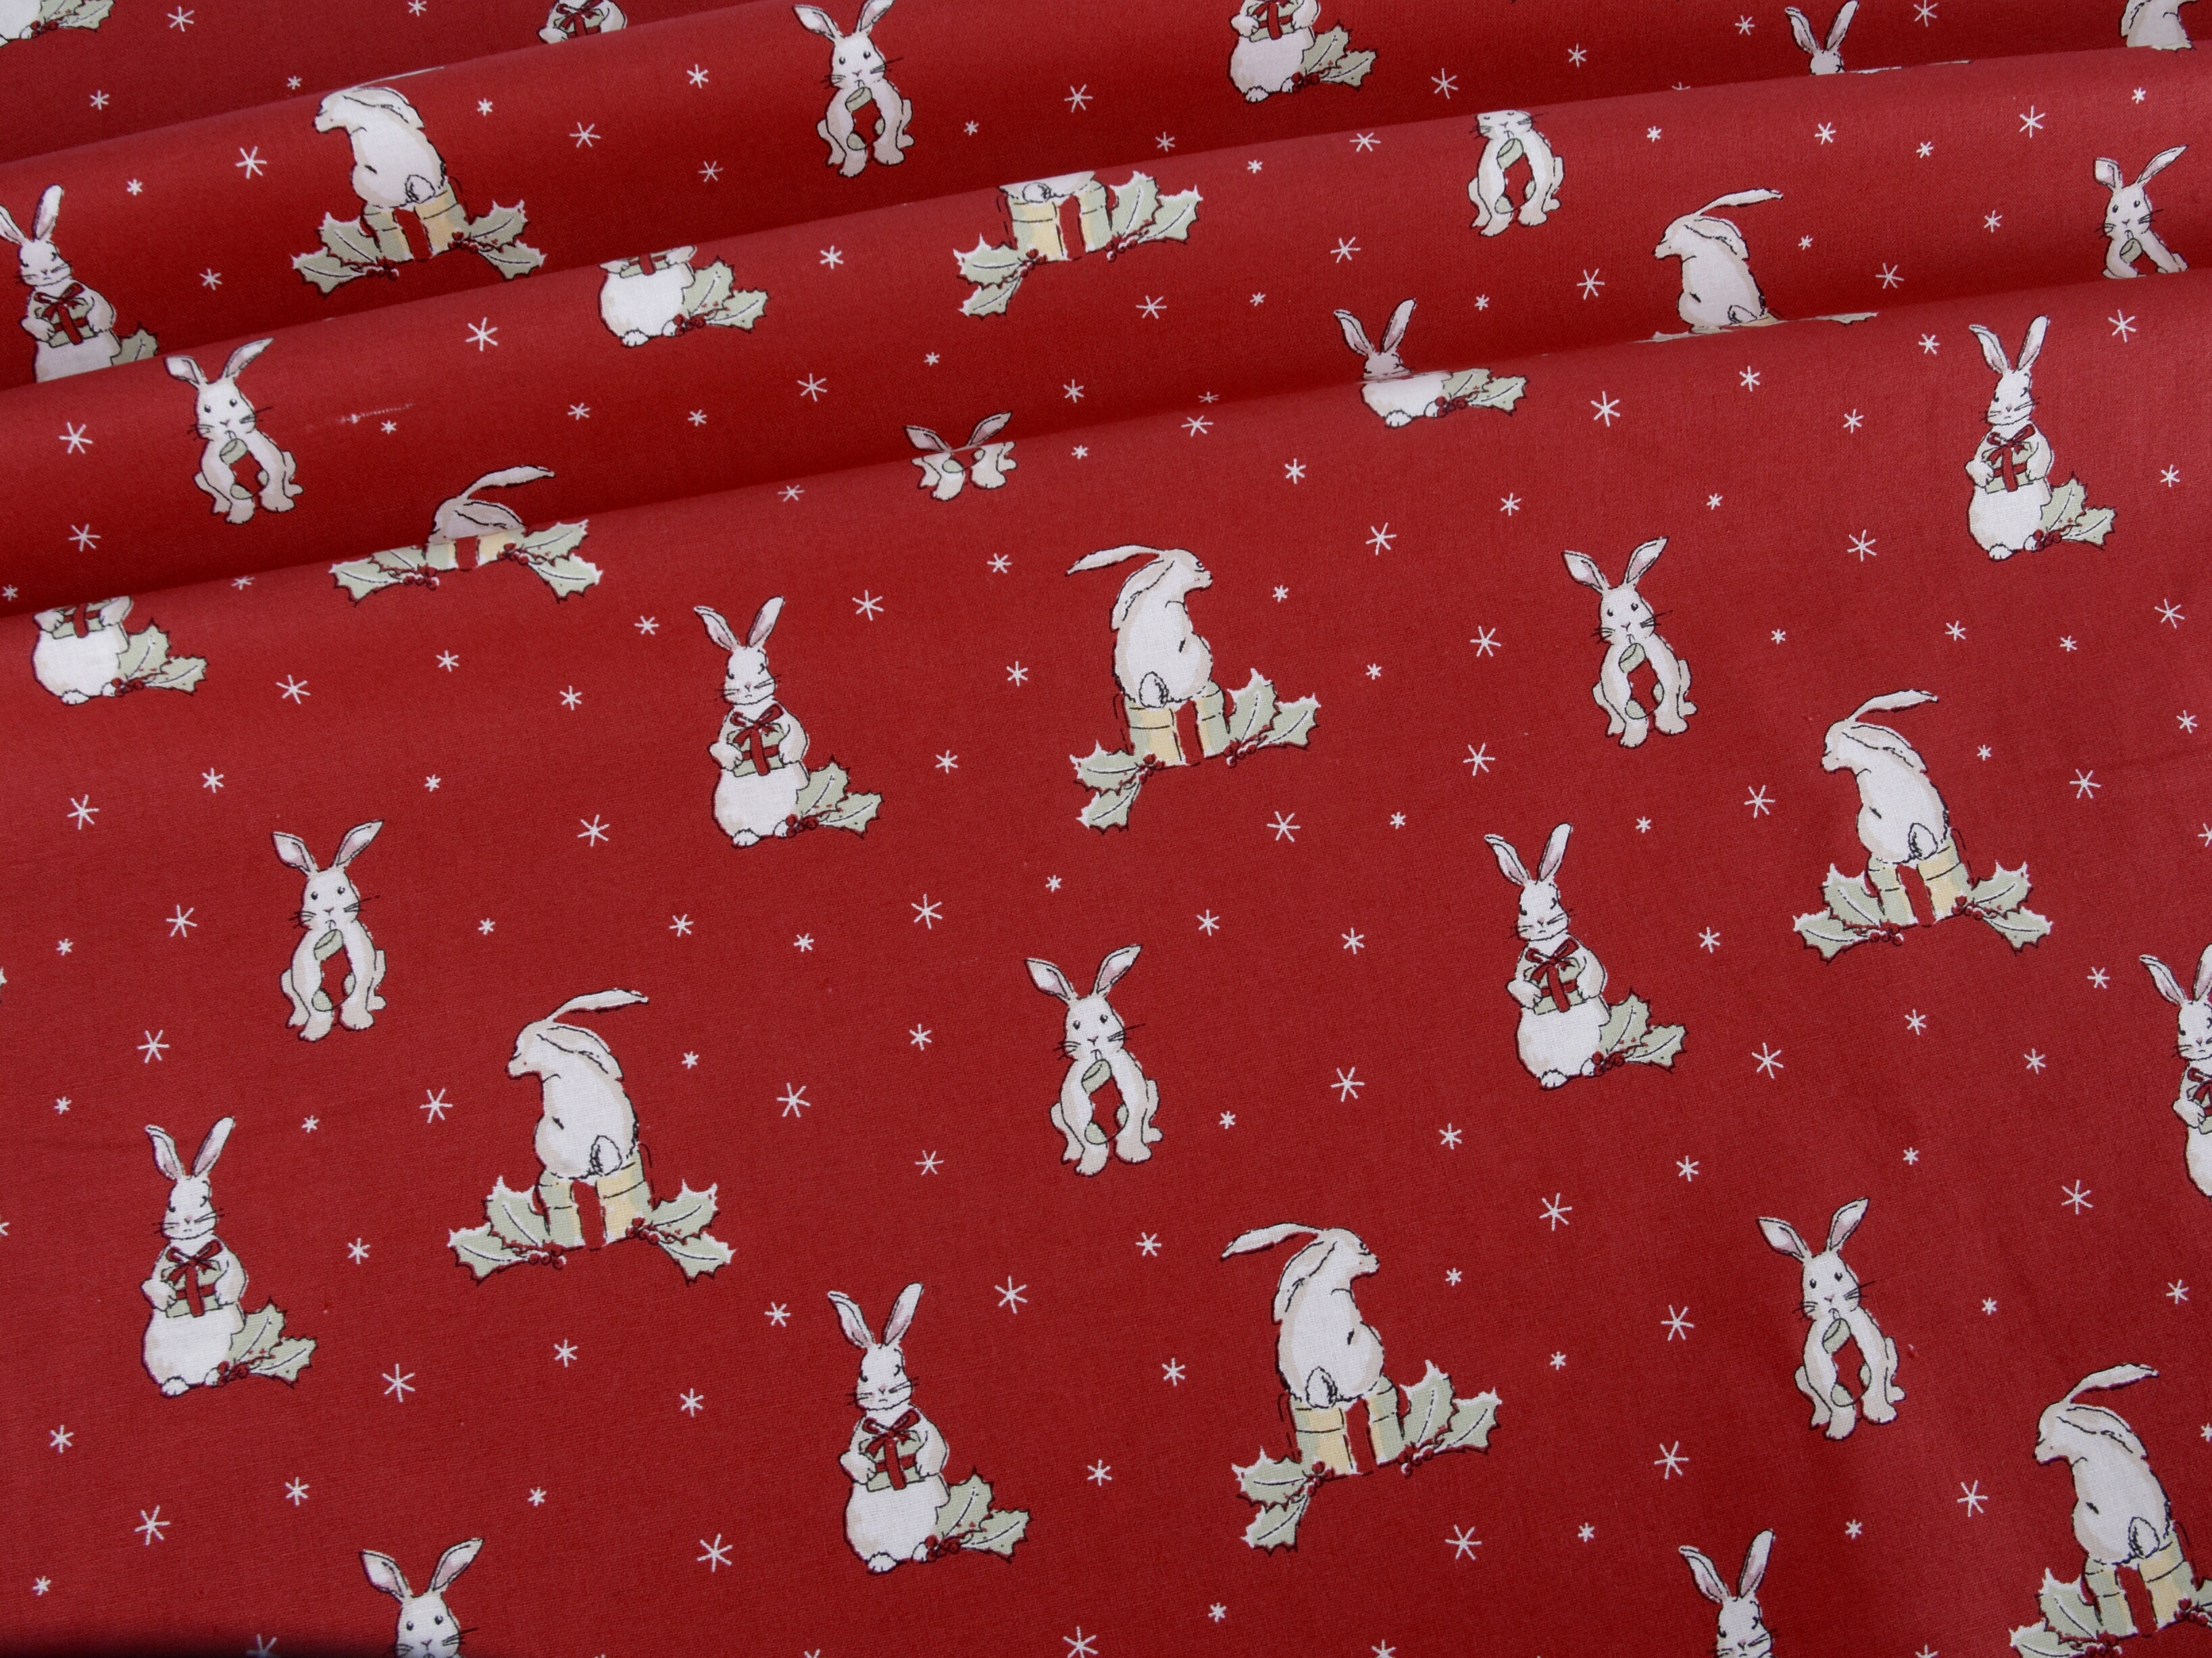 Christmas Critters By Debbie Shore - Rabbits